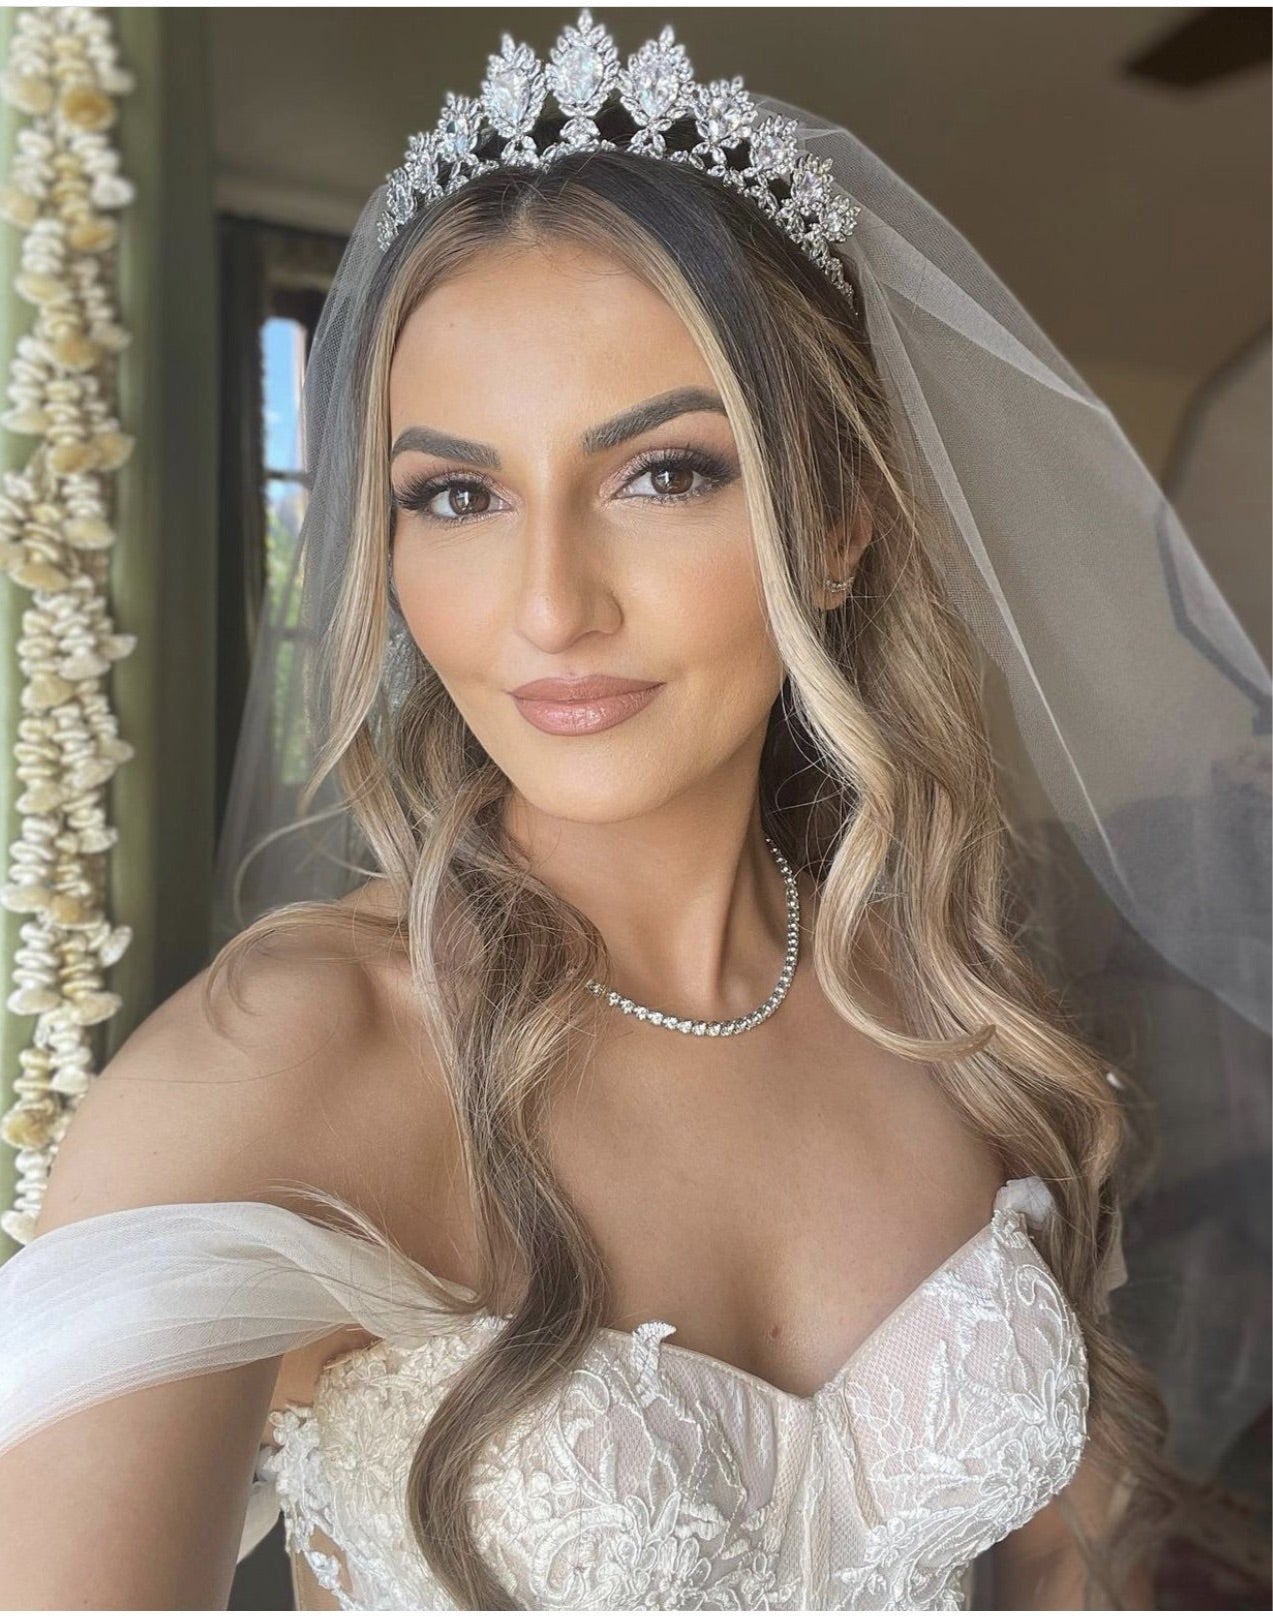 wedding veils with tiara with hair down